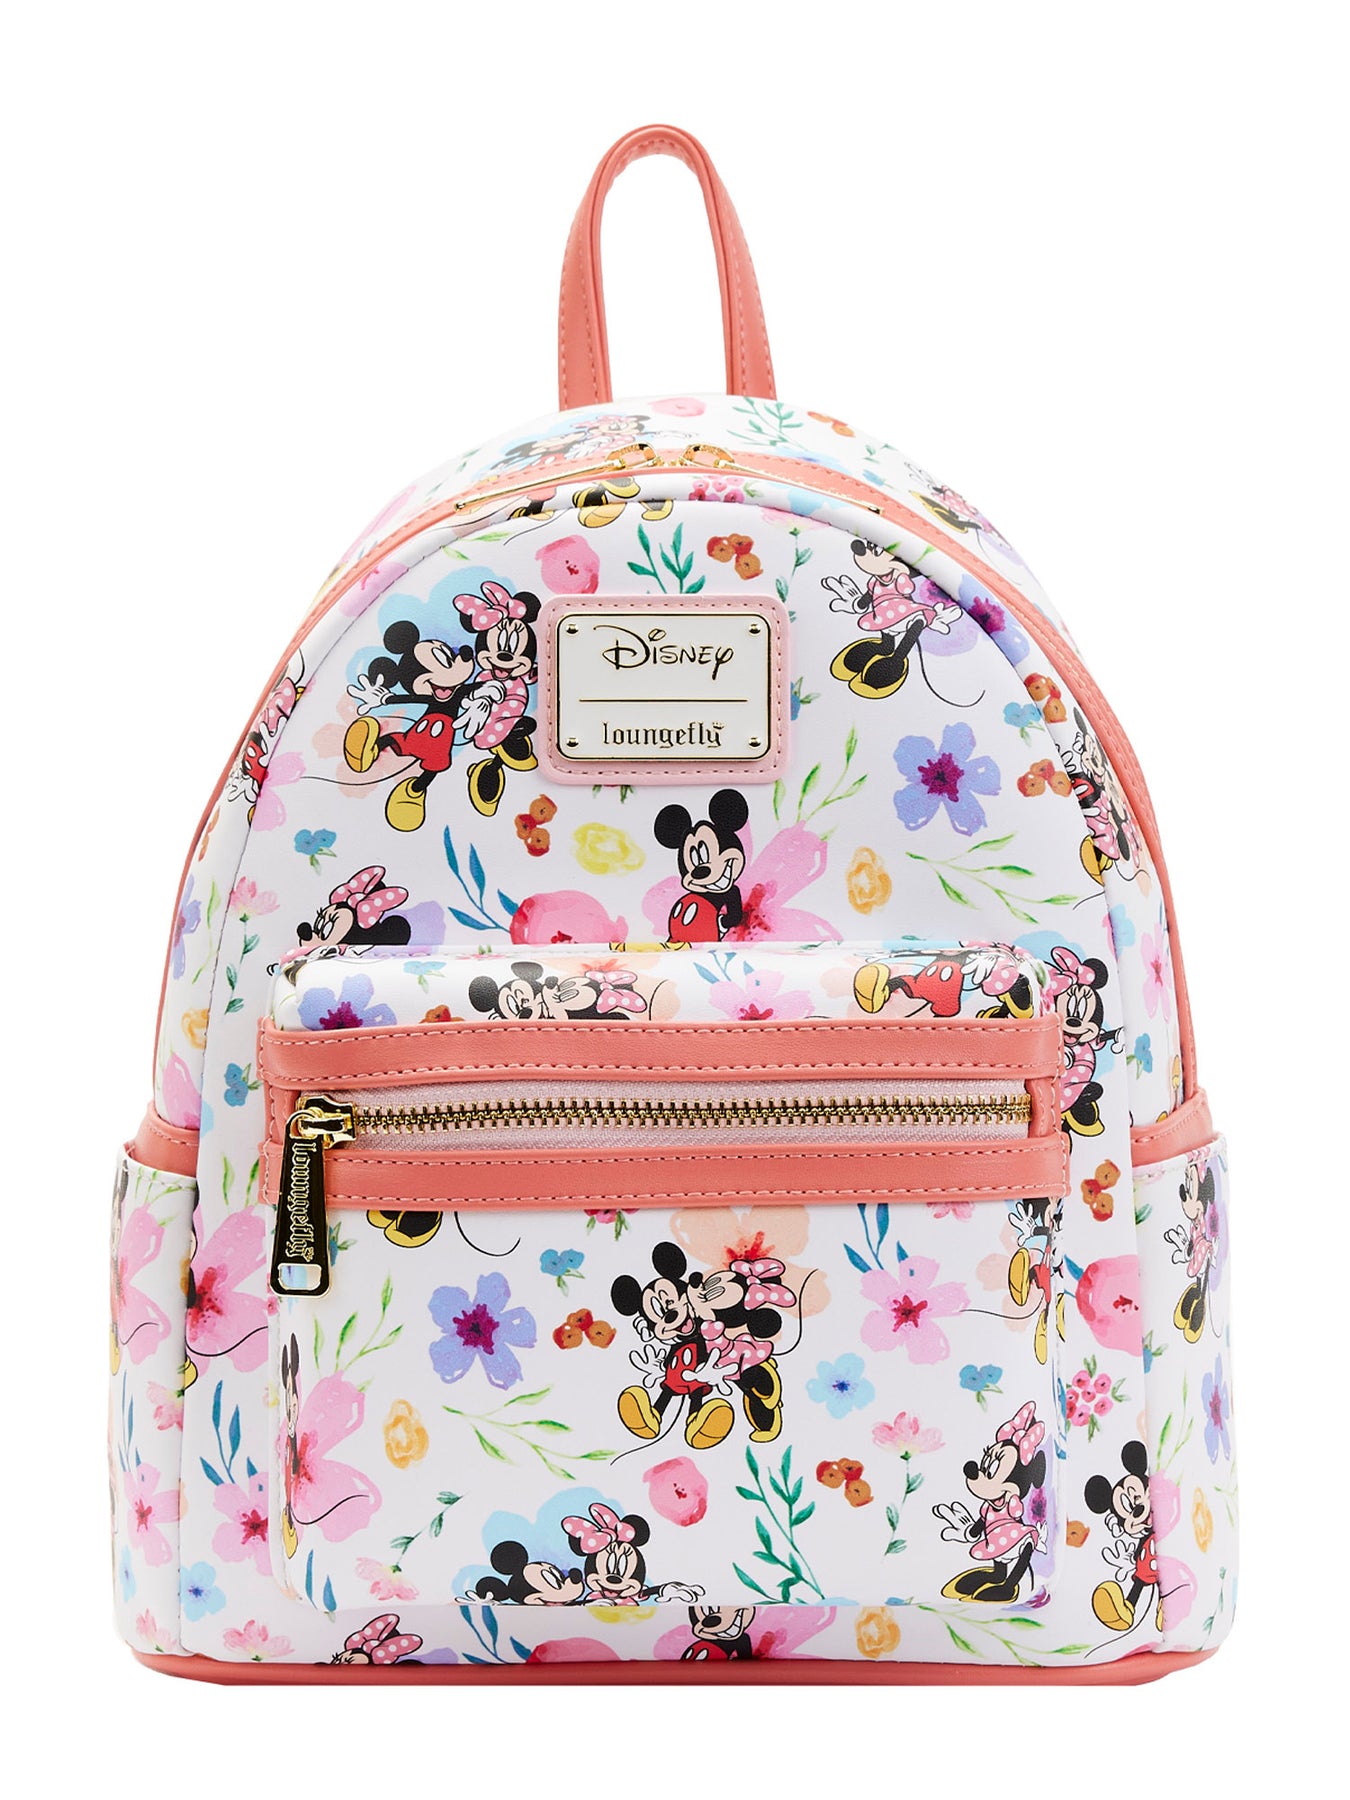 Buy Loungefly Disney Pirate Minnie Mouse Cosplay Women's Backpack Purse,  Multicolor, One Size, Wdbk3244 at Amazon.in